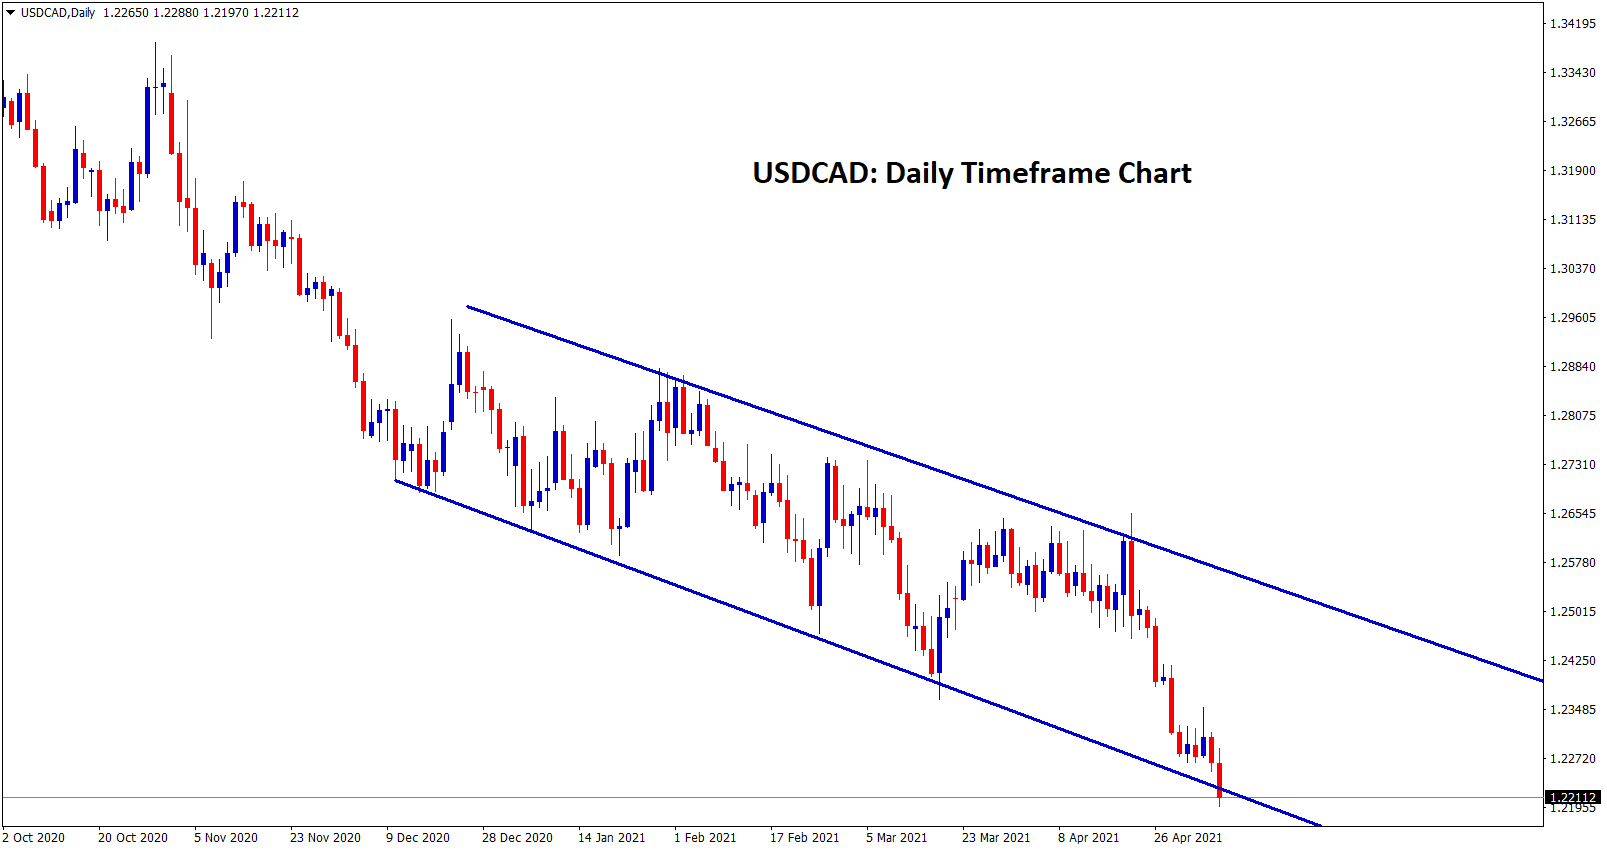 USDCAD hits the lower low and it continues to move towards 1.21 as a free fall to support